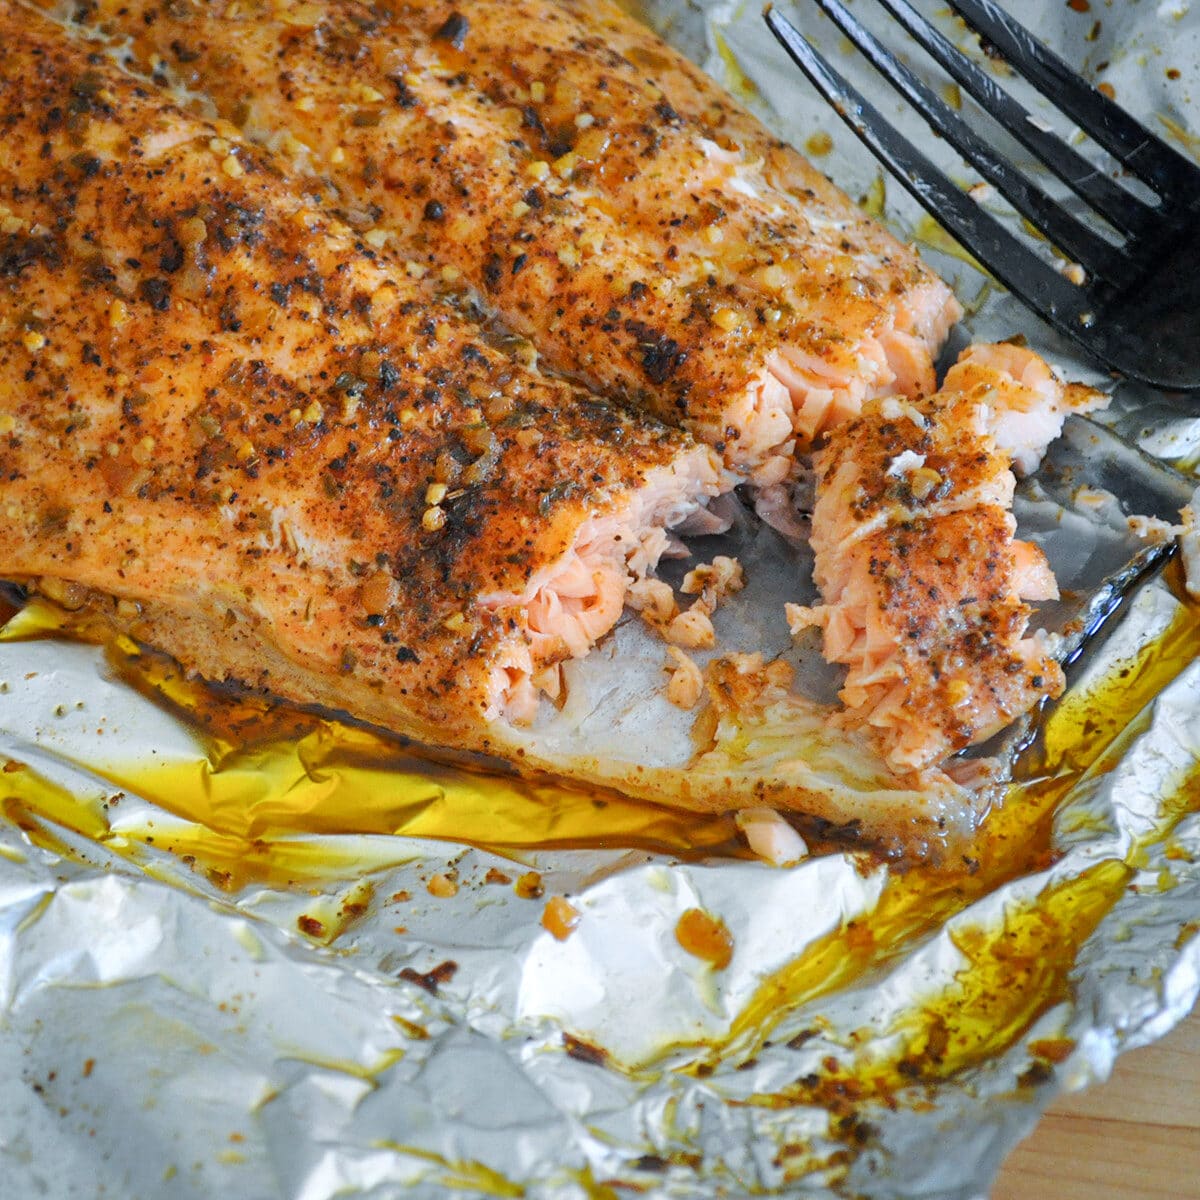 a close up photo a grilled salmon in foil next to a fork